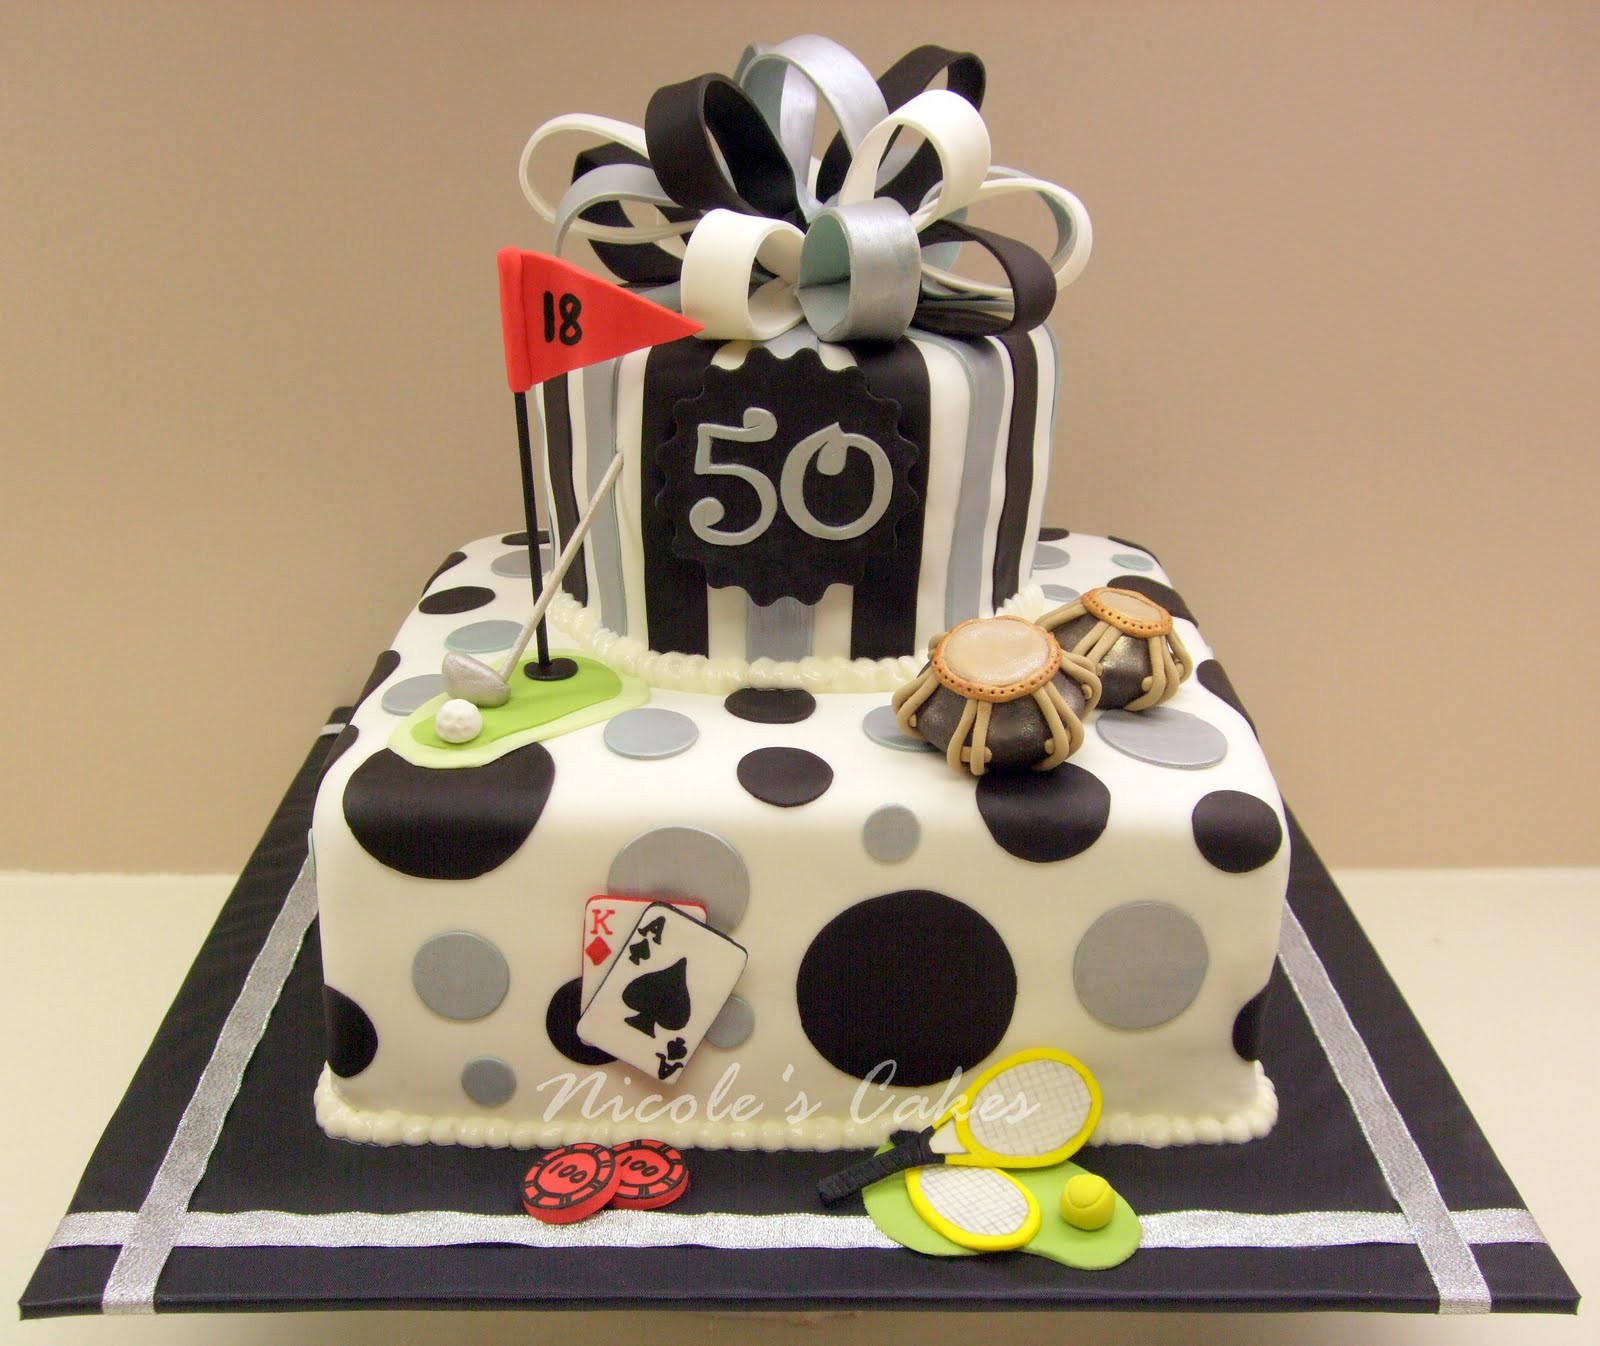 Birthday Cakes For Men
 Confections Cakes & Creations Favorite Things A